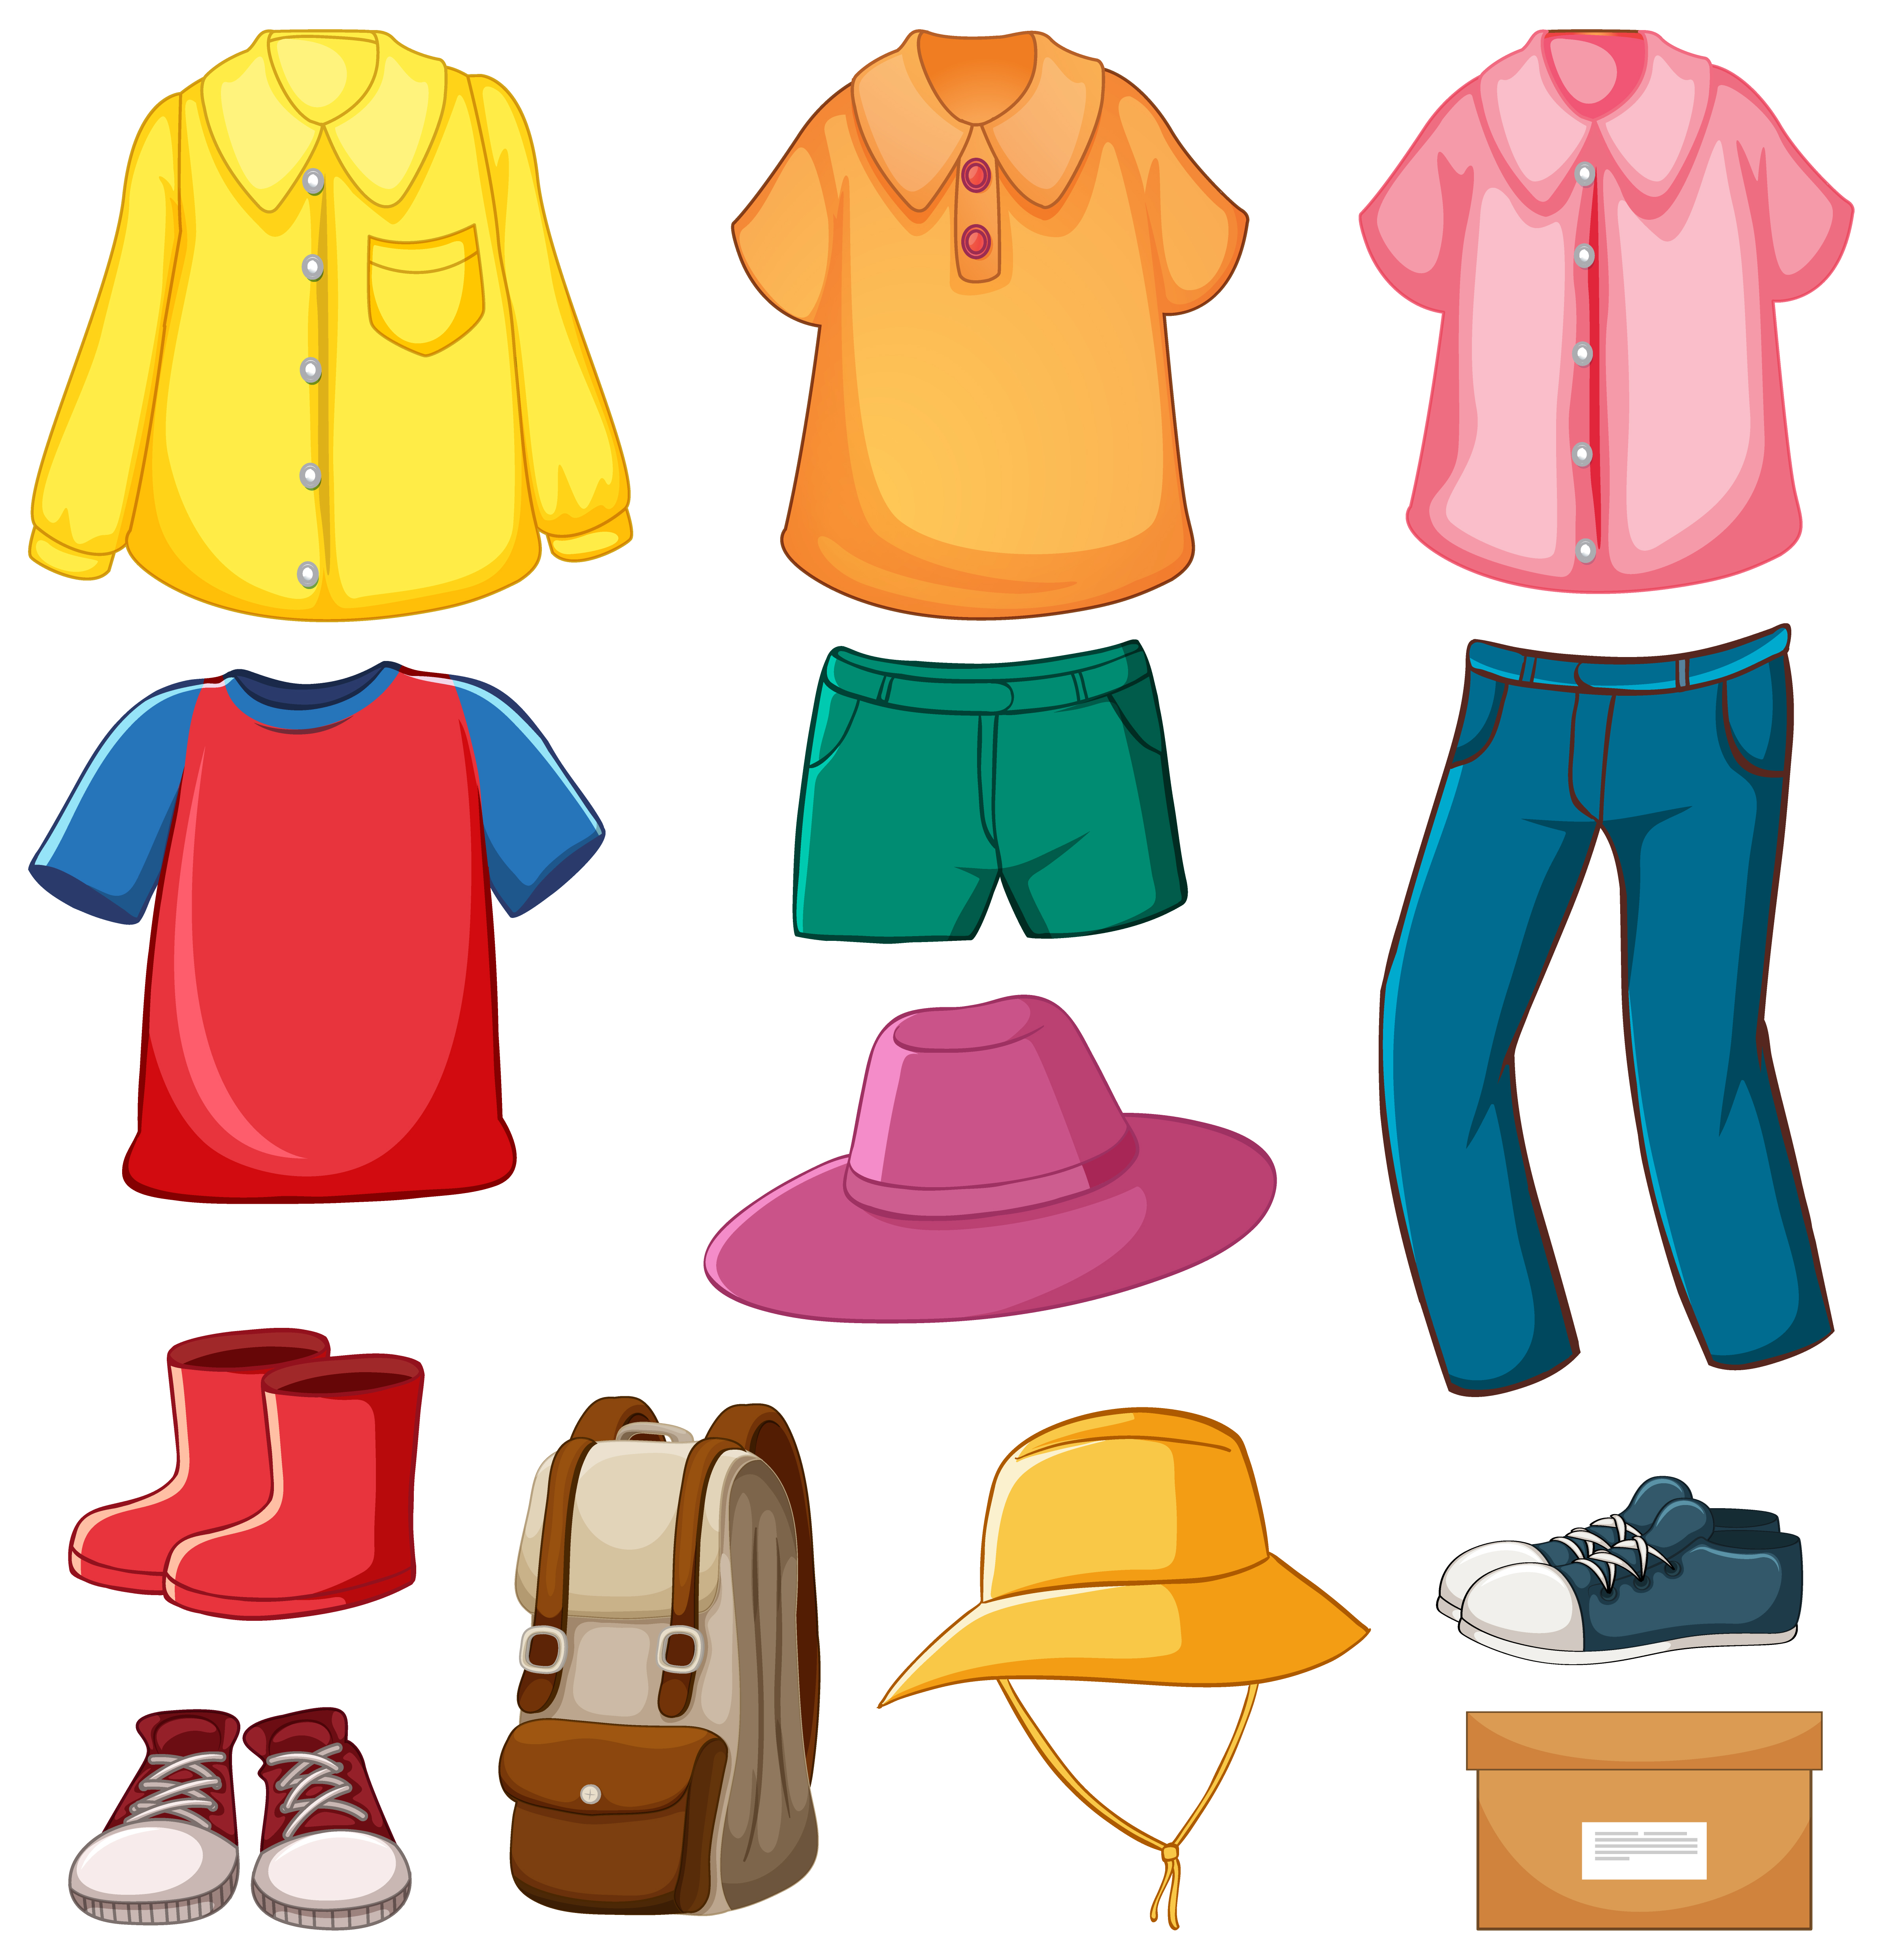 https://static.vecteezy.com/system/resources/previews/001/591/831/original/set-of-clothes-with-accessories-isolated-on-white-background-free-vector.jpg